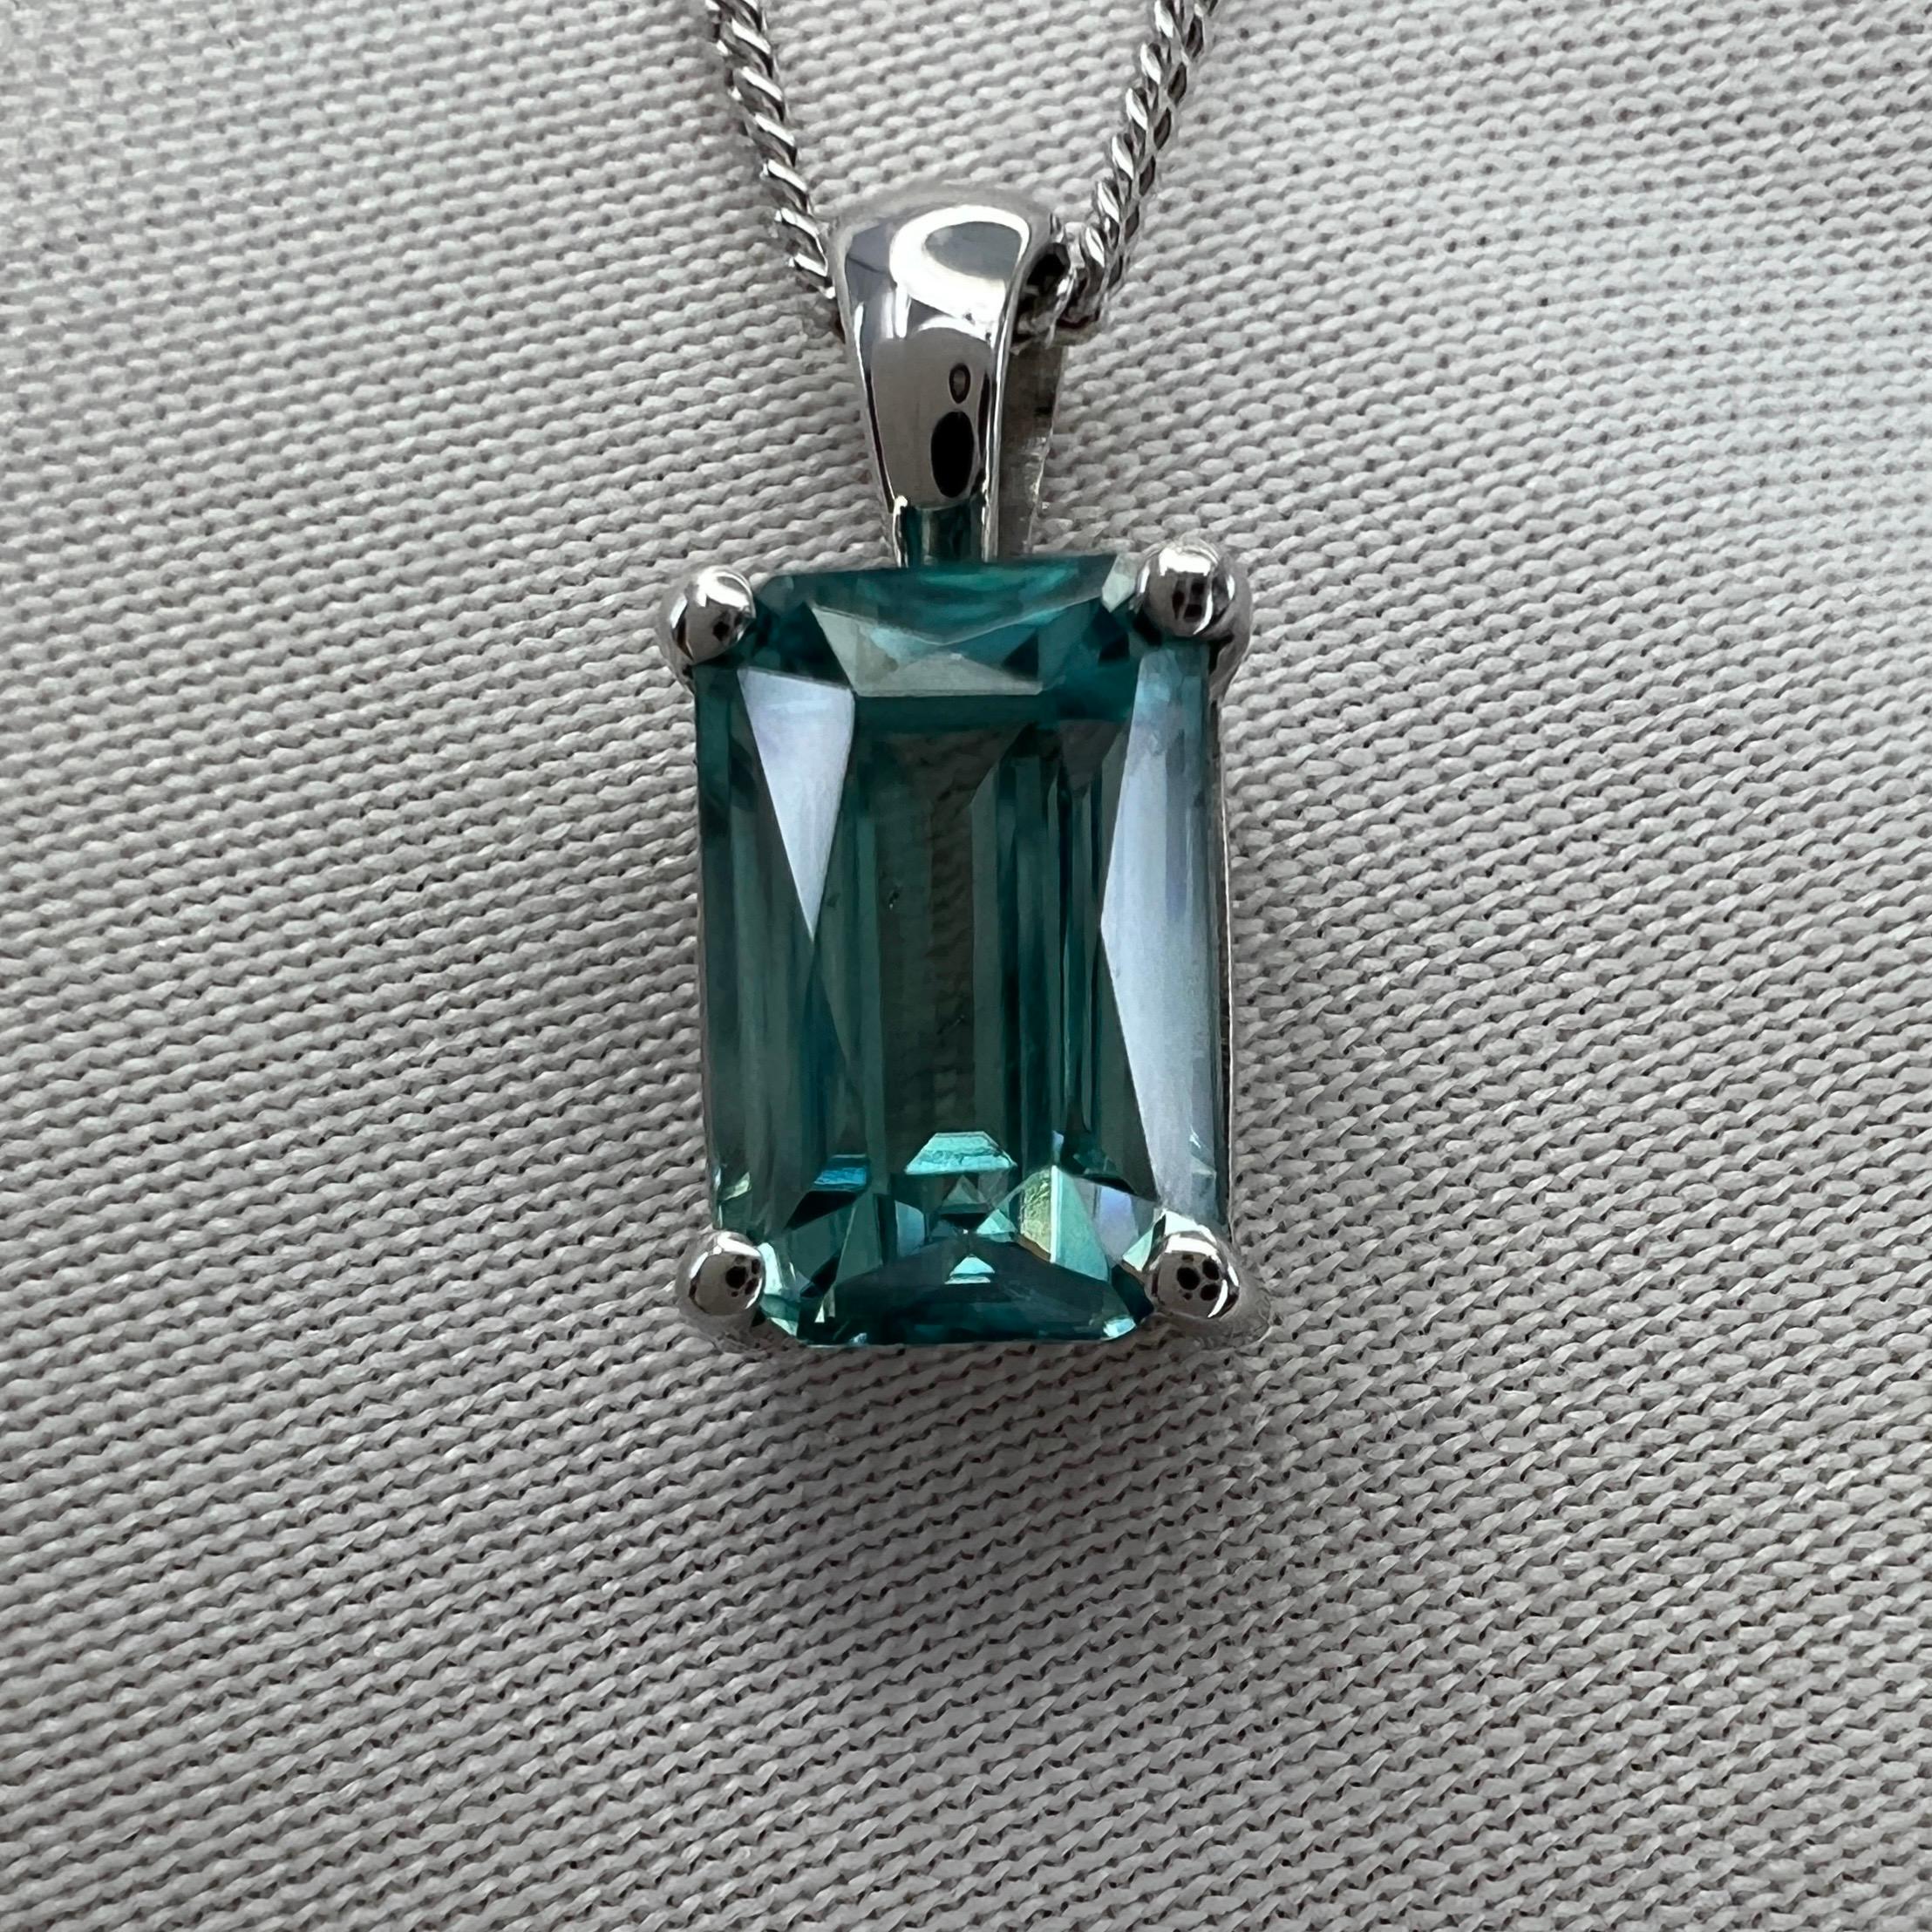 Natural Blue Zircon Fancy Emerald/Octagonal Cut 18k White Gold Pendant Necklace.

Beautiful natural 2.41 carat blue zircon set in a fine 18k white gold solitaire pendant. Stunning blue zircon with a vivid neon blue colour and excellent clarity, very